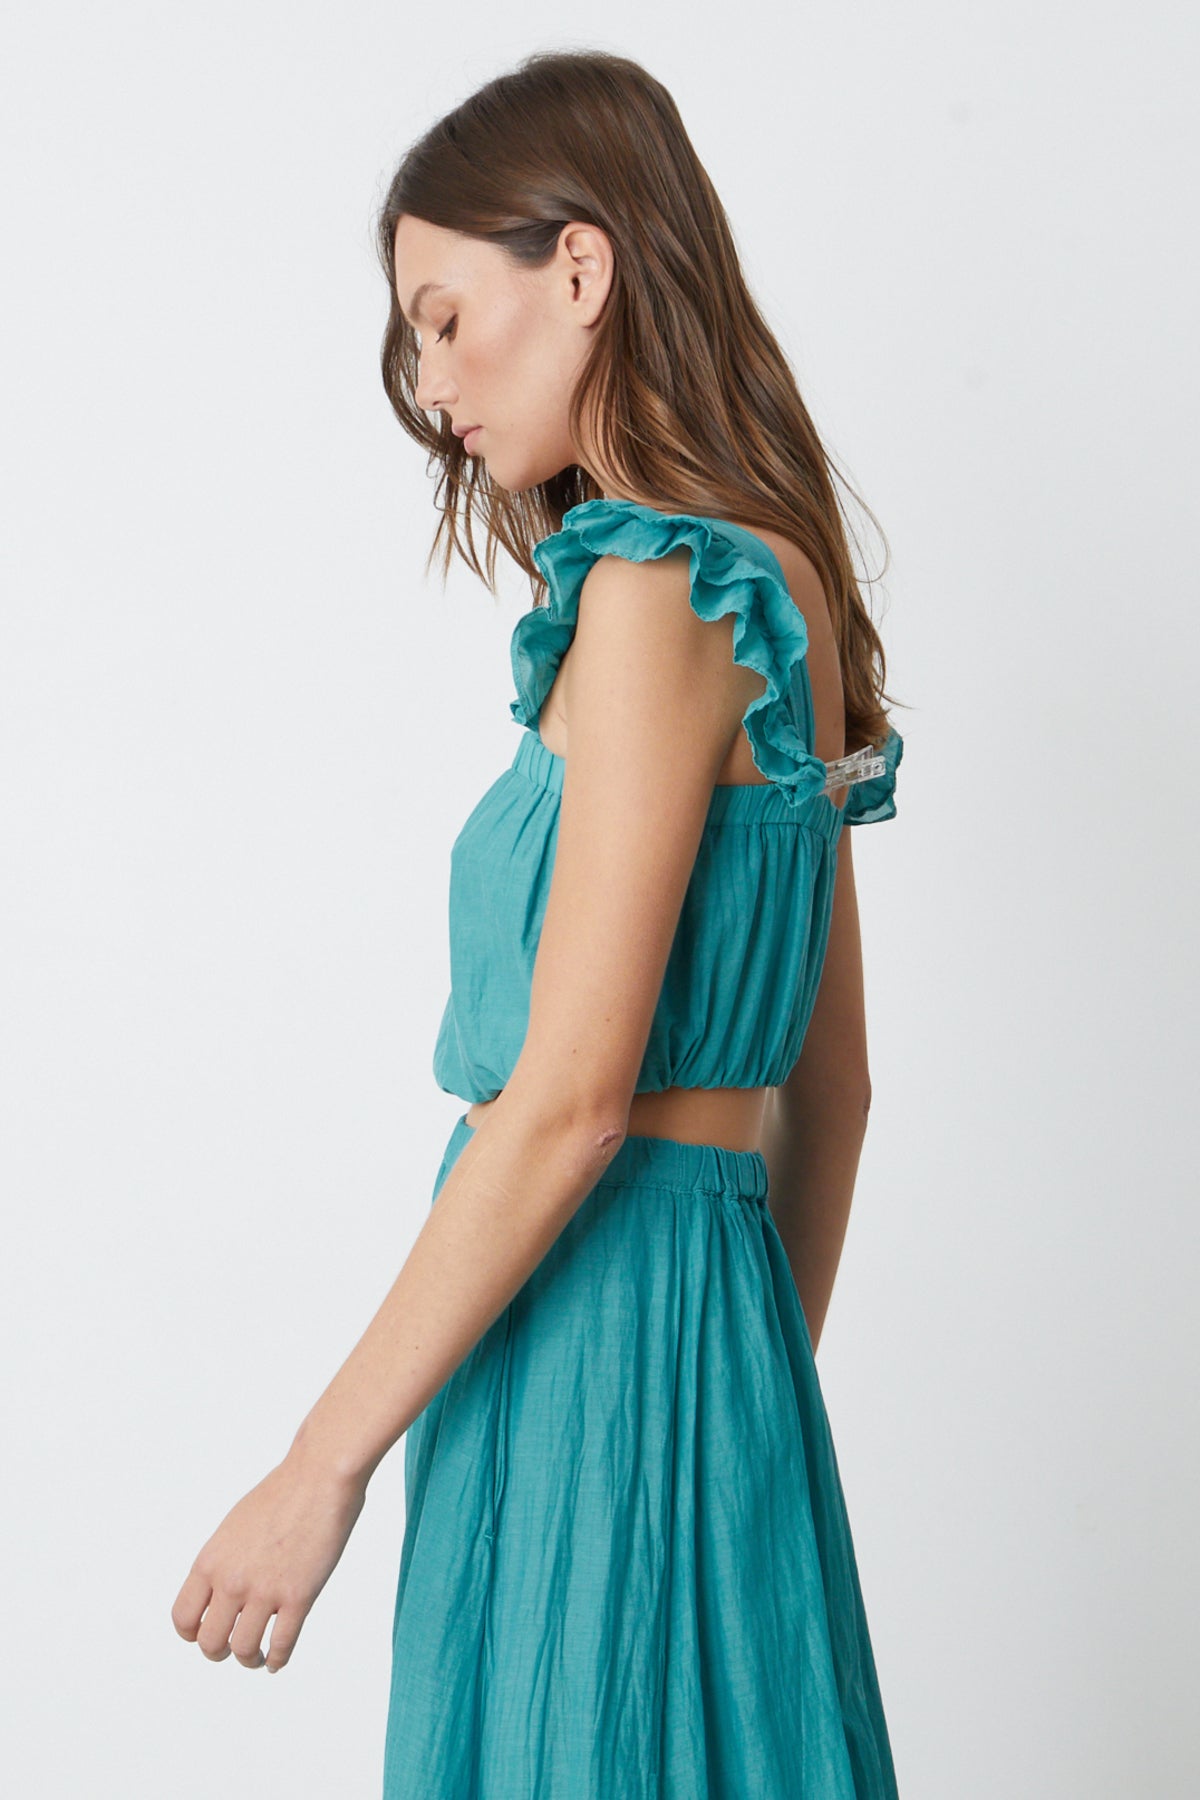   The model is wearing a GRACEN CROPPED TANK TOP by Velvet by Graham & Spencer with ruffled shoulders. 